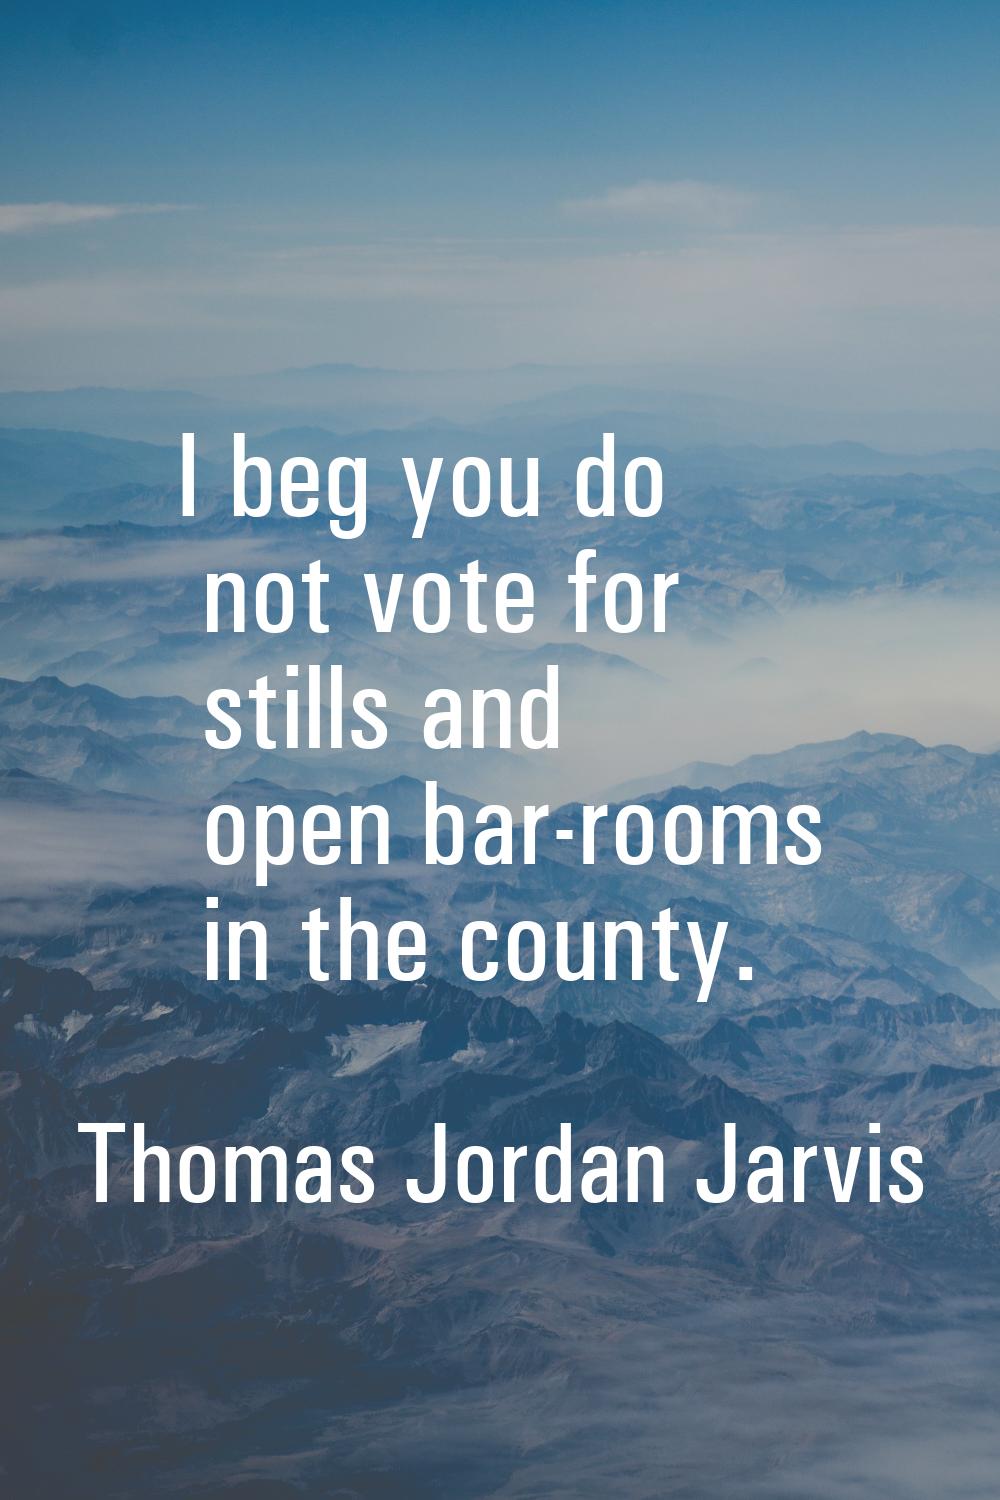 I beg you do not vote for stills and open bar-rooms in the county.